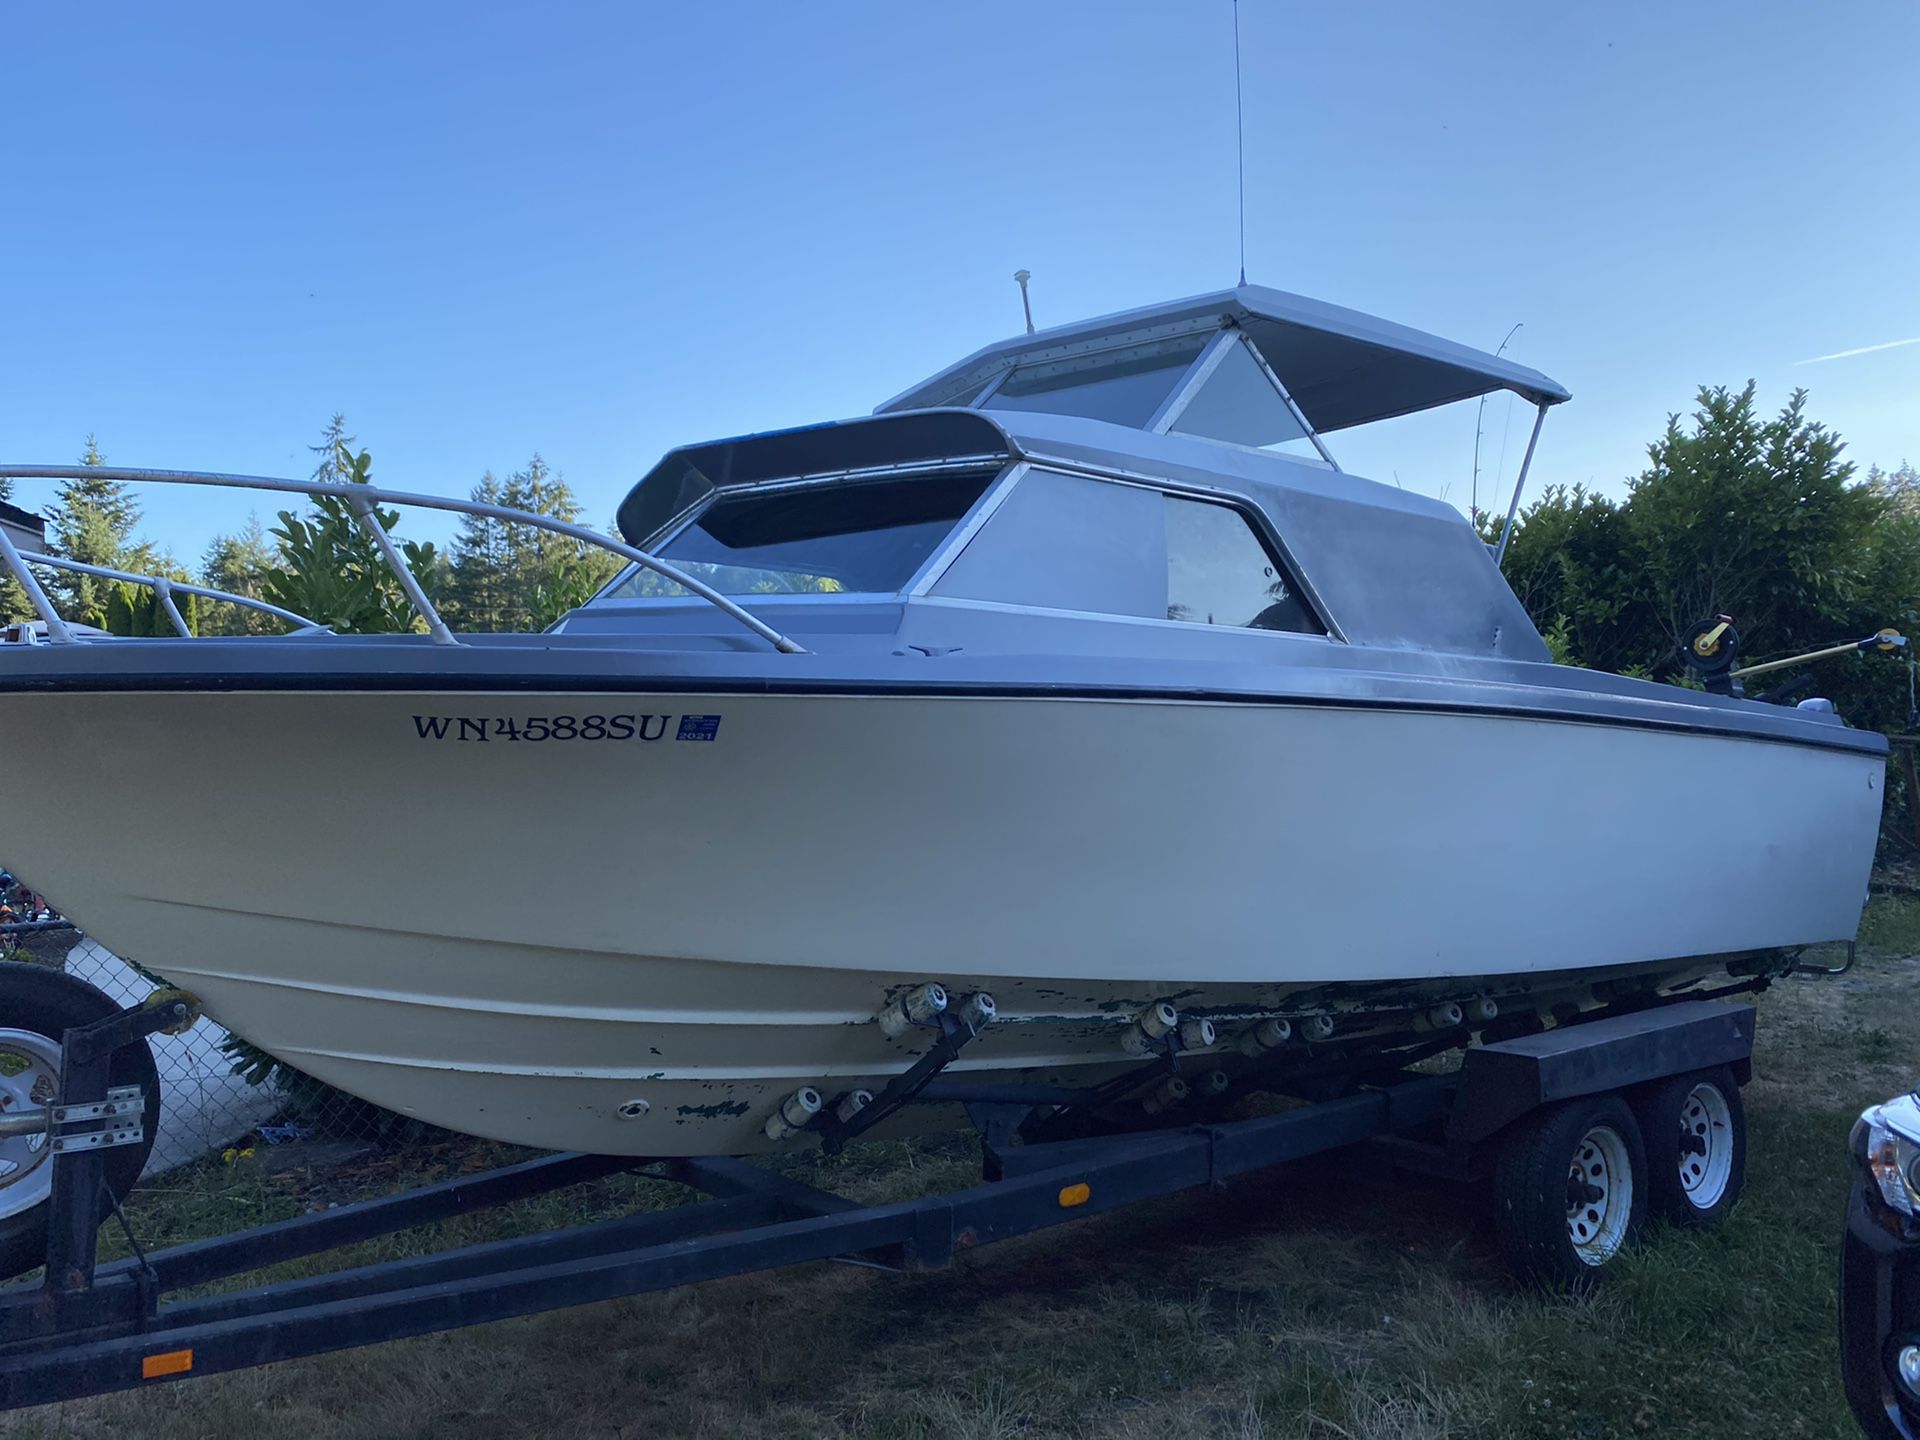 Price drop need to sell 24’ Fiberform may also trade for other boat or Chevy truck